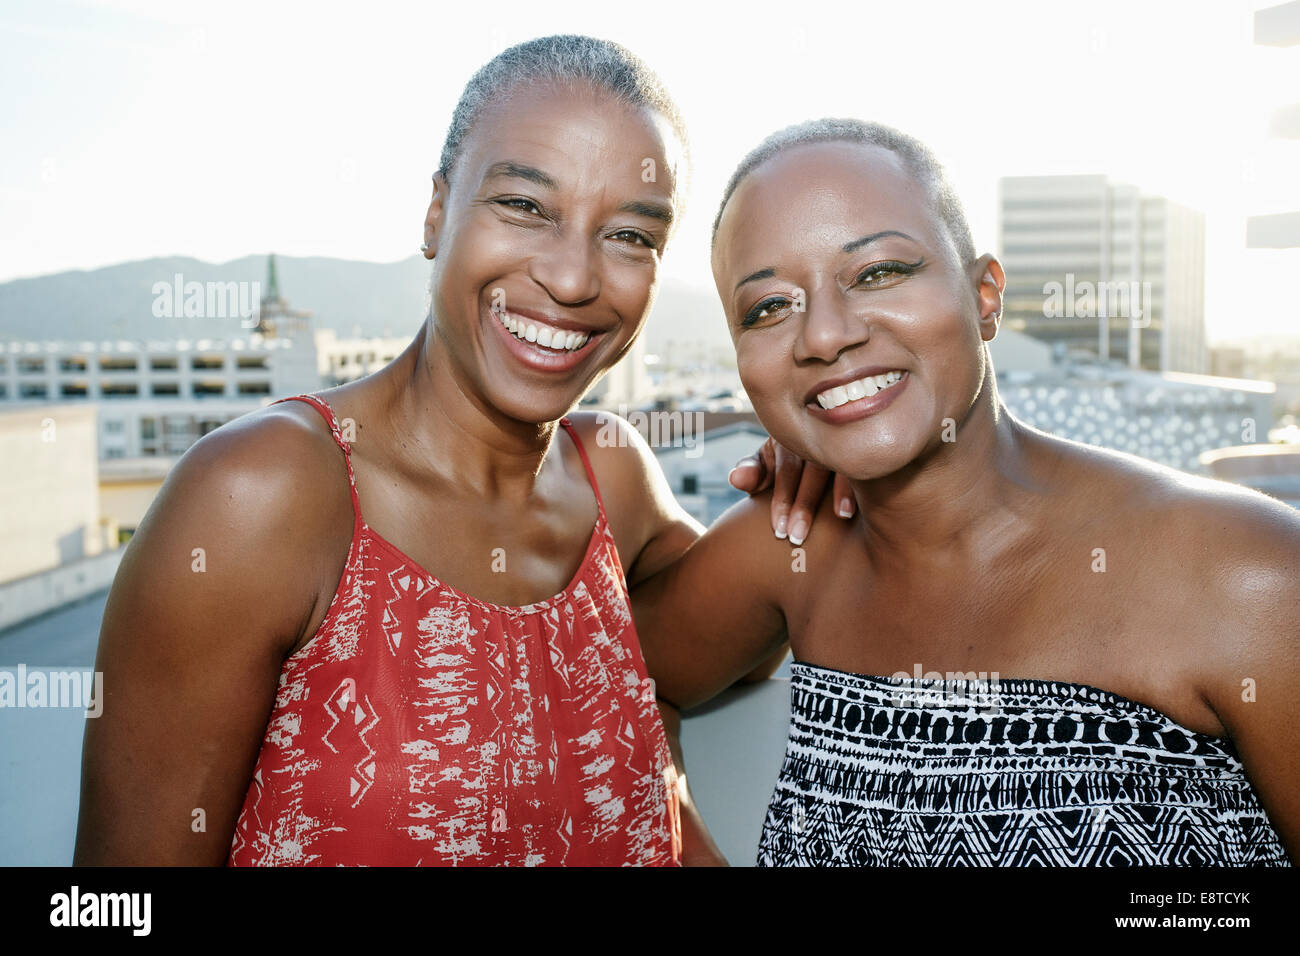 Black women smiling together on urban rooftop Stock Photo